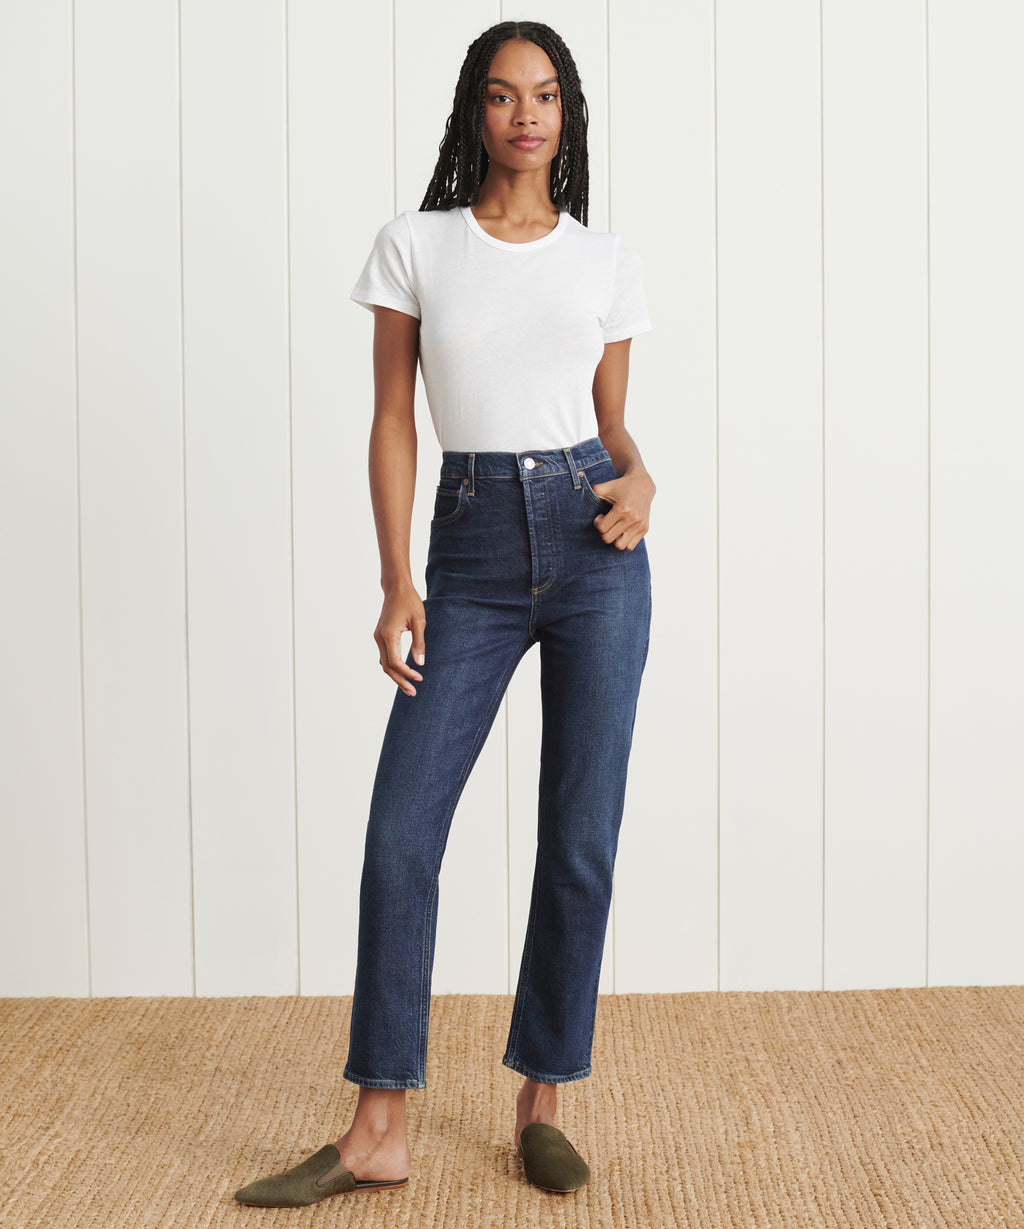 Denim Outfits Are Trending In A Big Way — This Is My Go-To - The Mom Edit